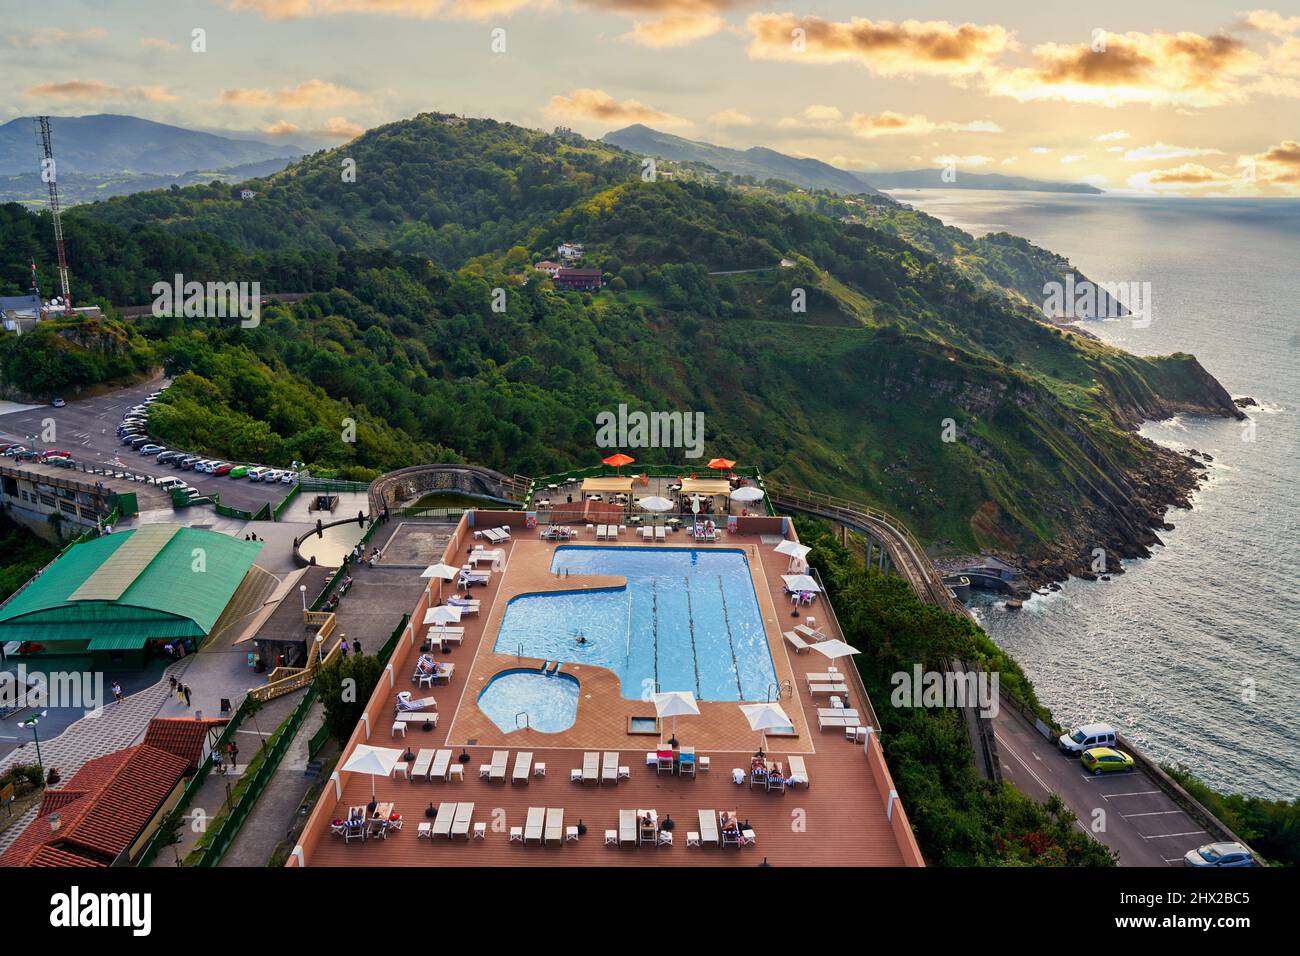 Views from the Torreón del Monte Igeldo, the Mercure Hotel pool and views of the Basque Coast, San Sebastian, a cosmopolitan city of 187,000 Stock Photo